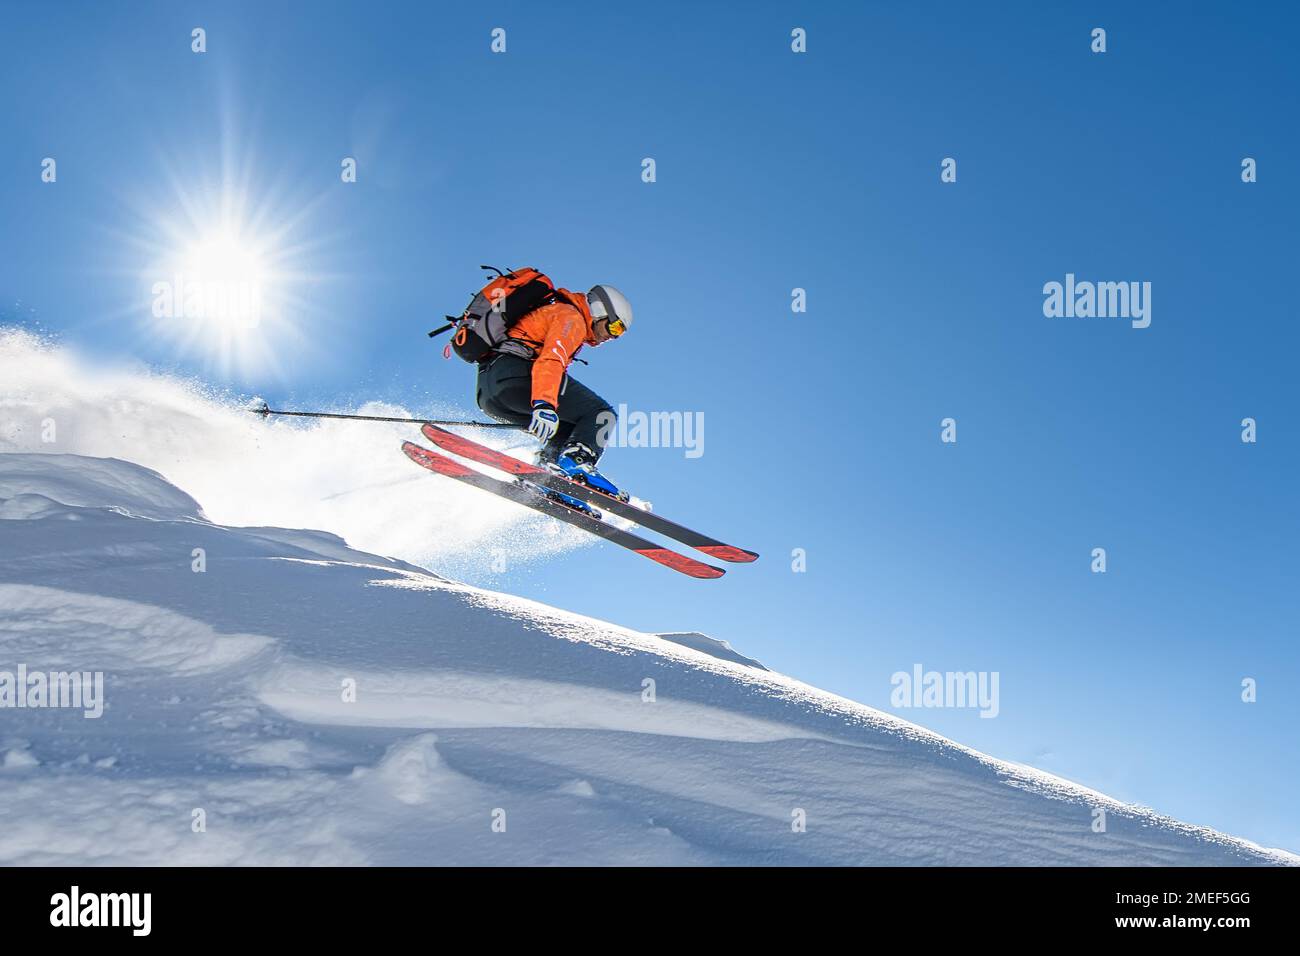 A young skier at speed flying through the sky Stock Photo